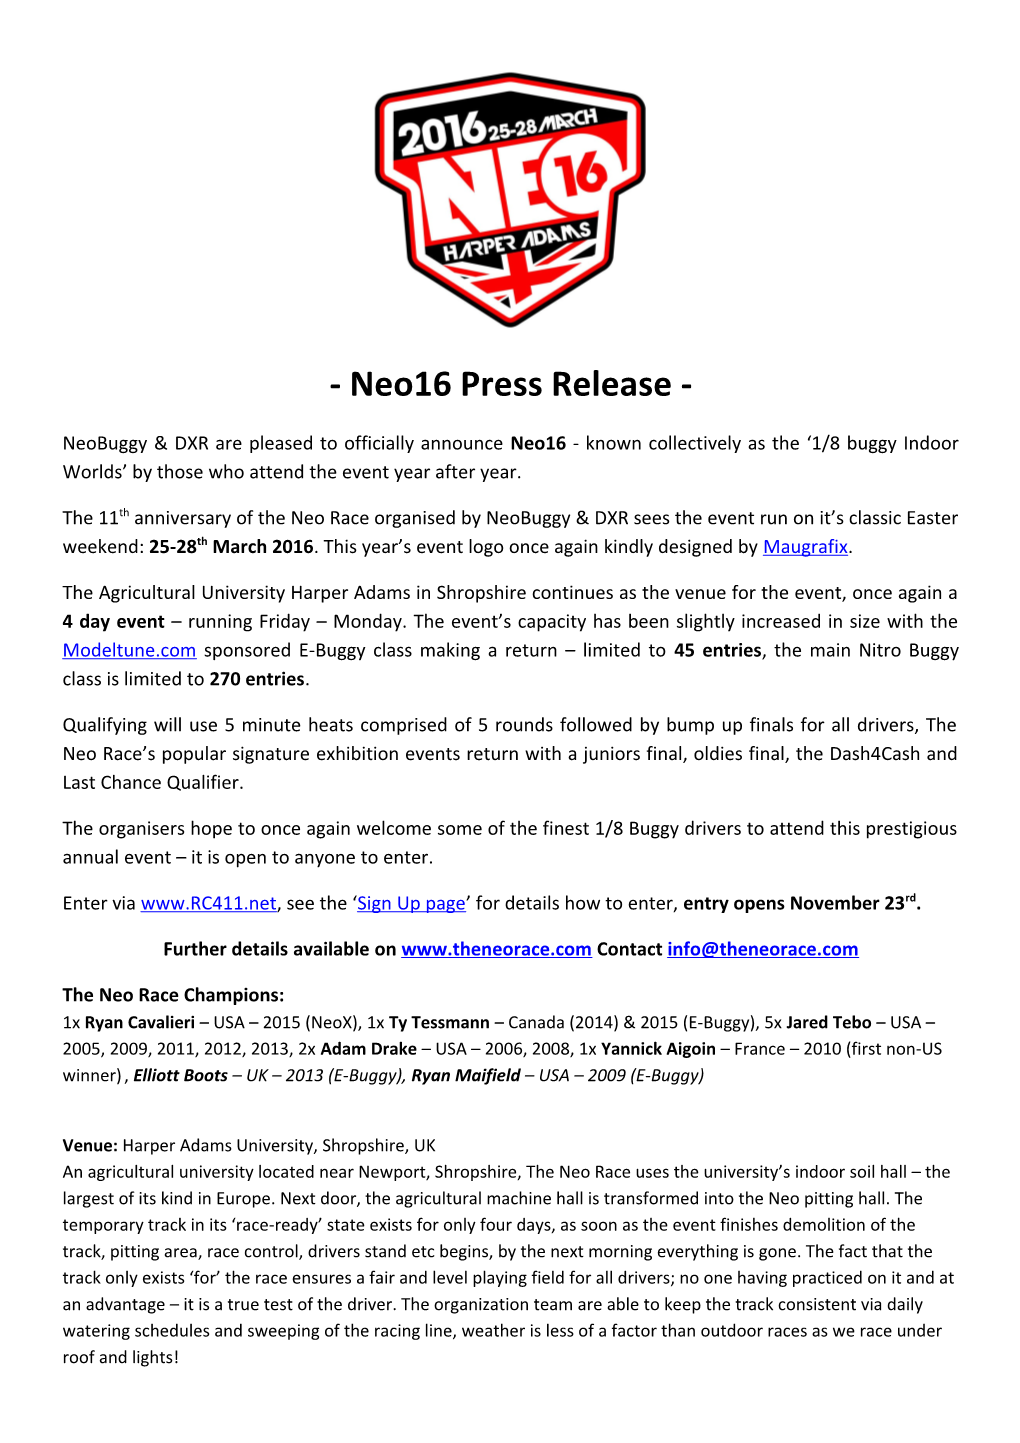 Neobuggy & DXR Are Pleased to Officially Announce Neo16-Known Collectively As the 1/8 Buggy